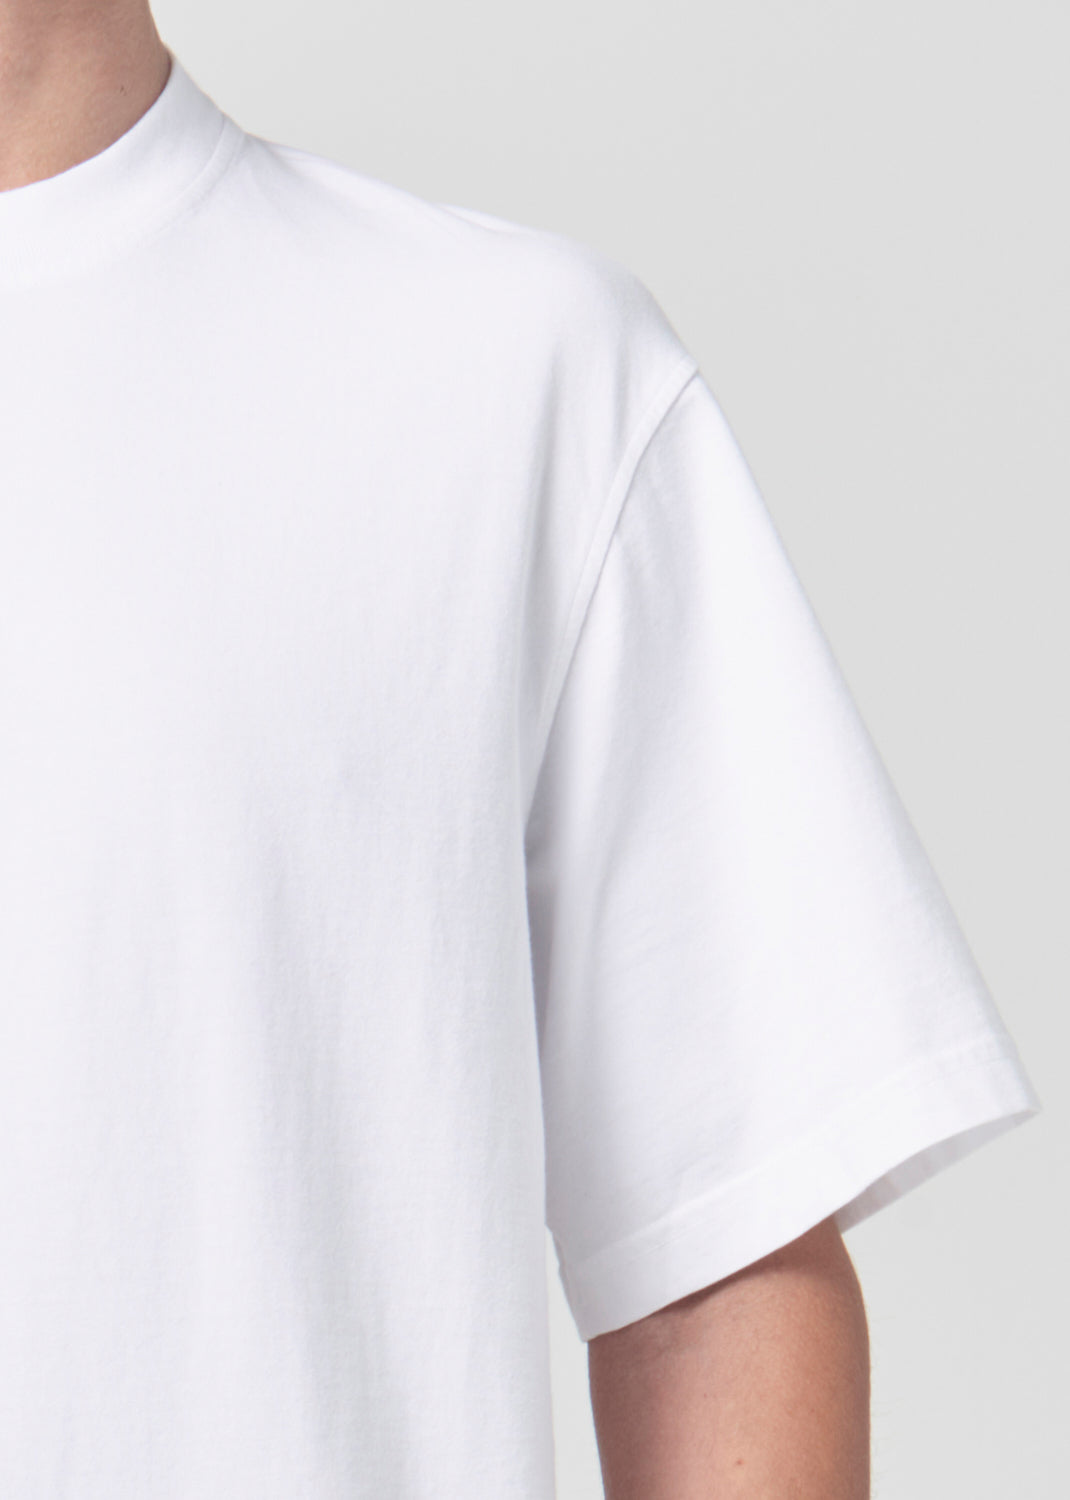 Asha Mock Neck Tee in White close up